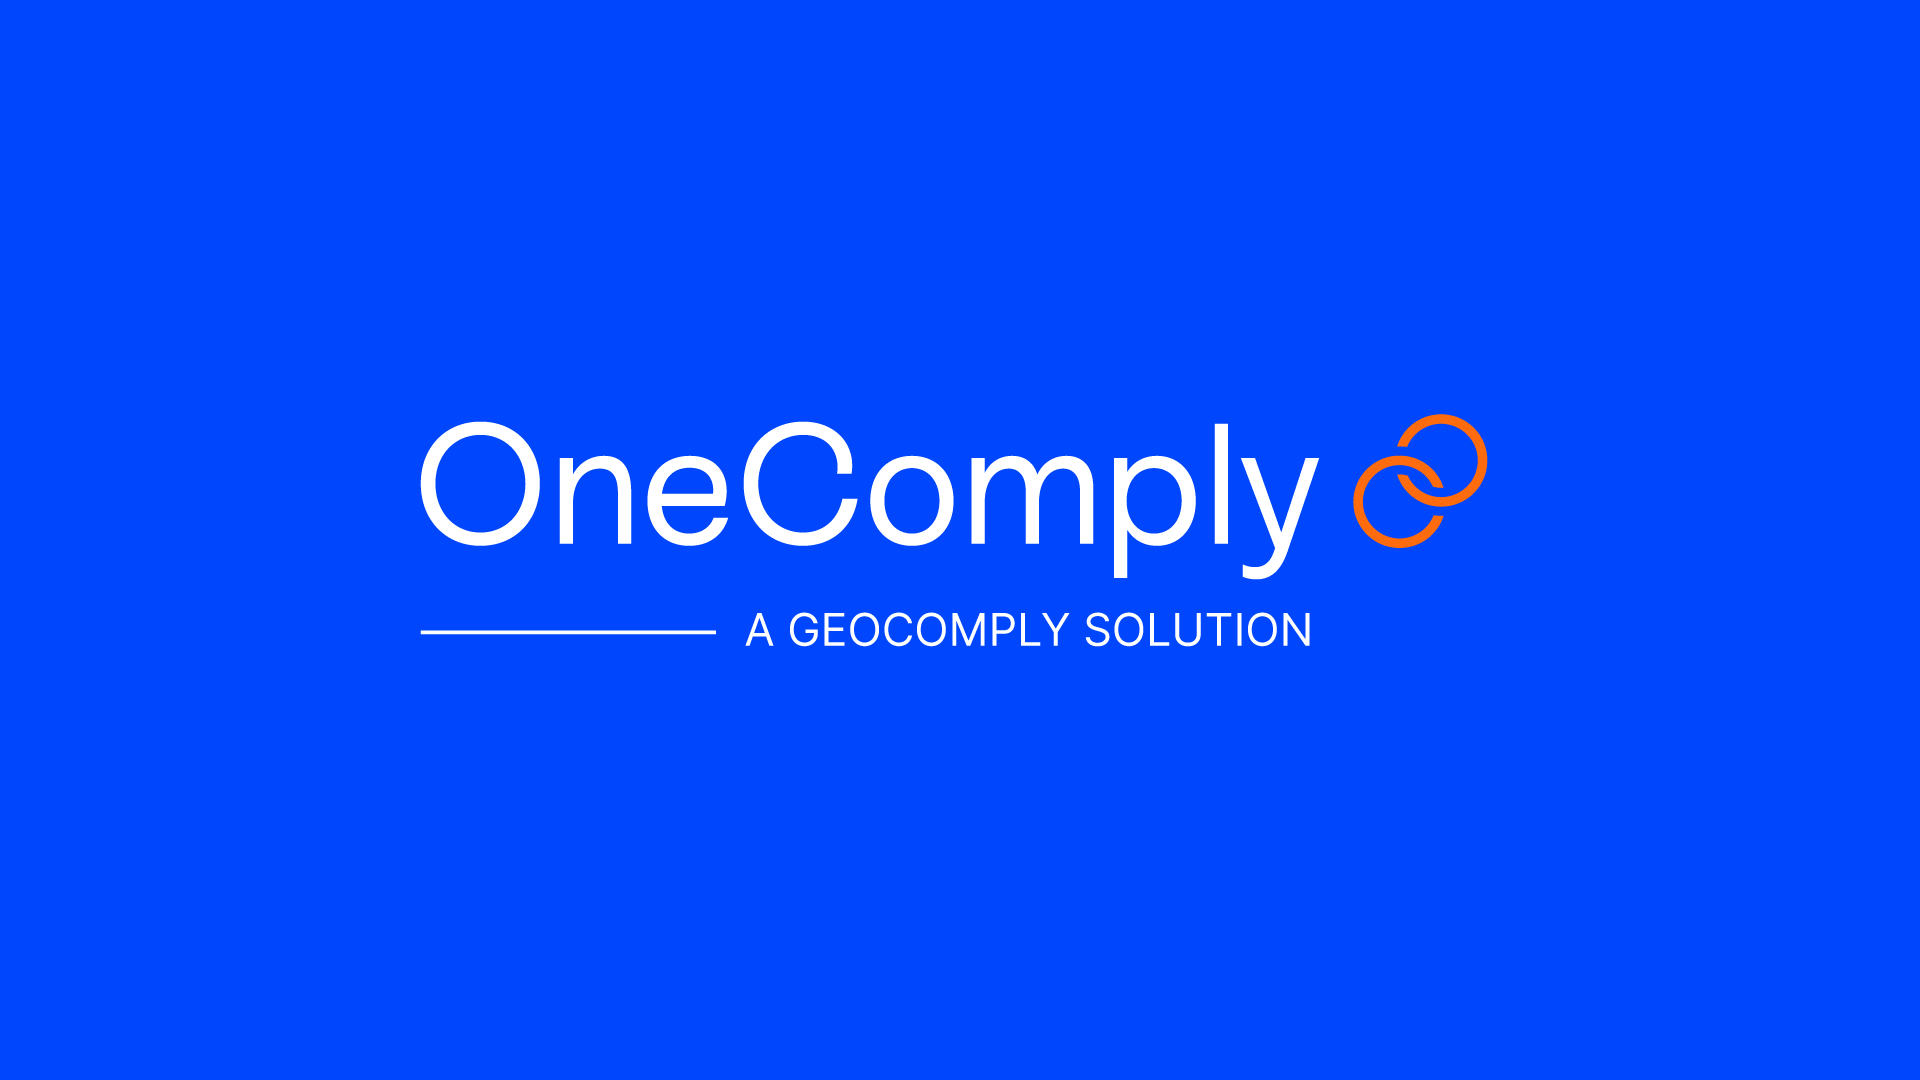 GeoComply acquires leading licensing and compliance platform provider OneComply